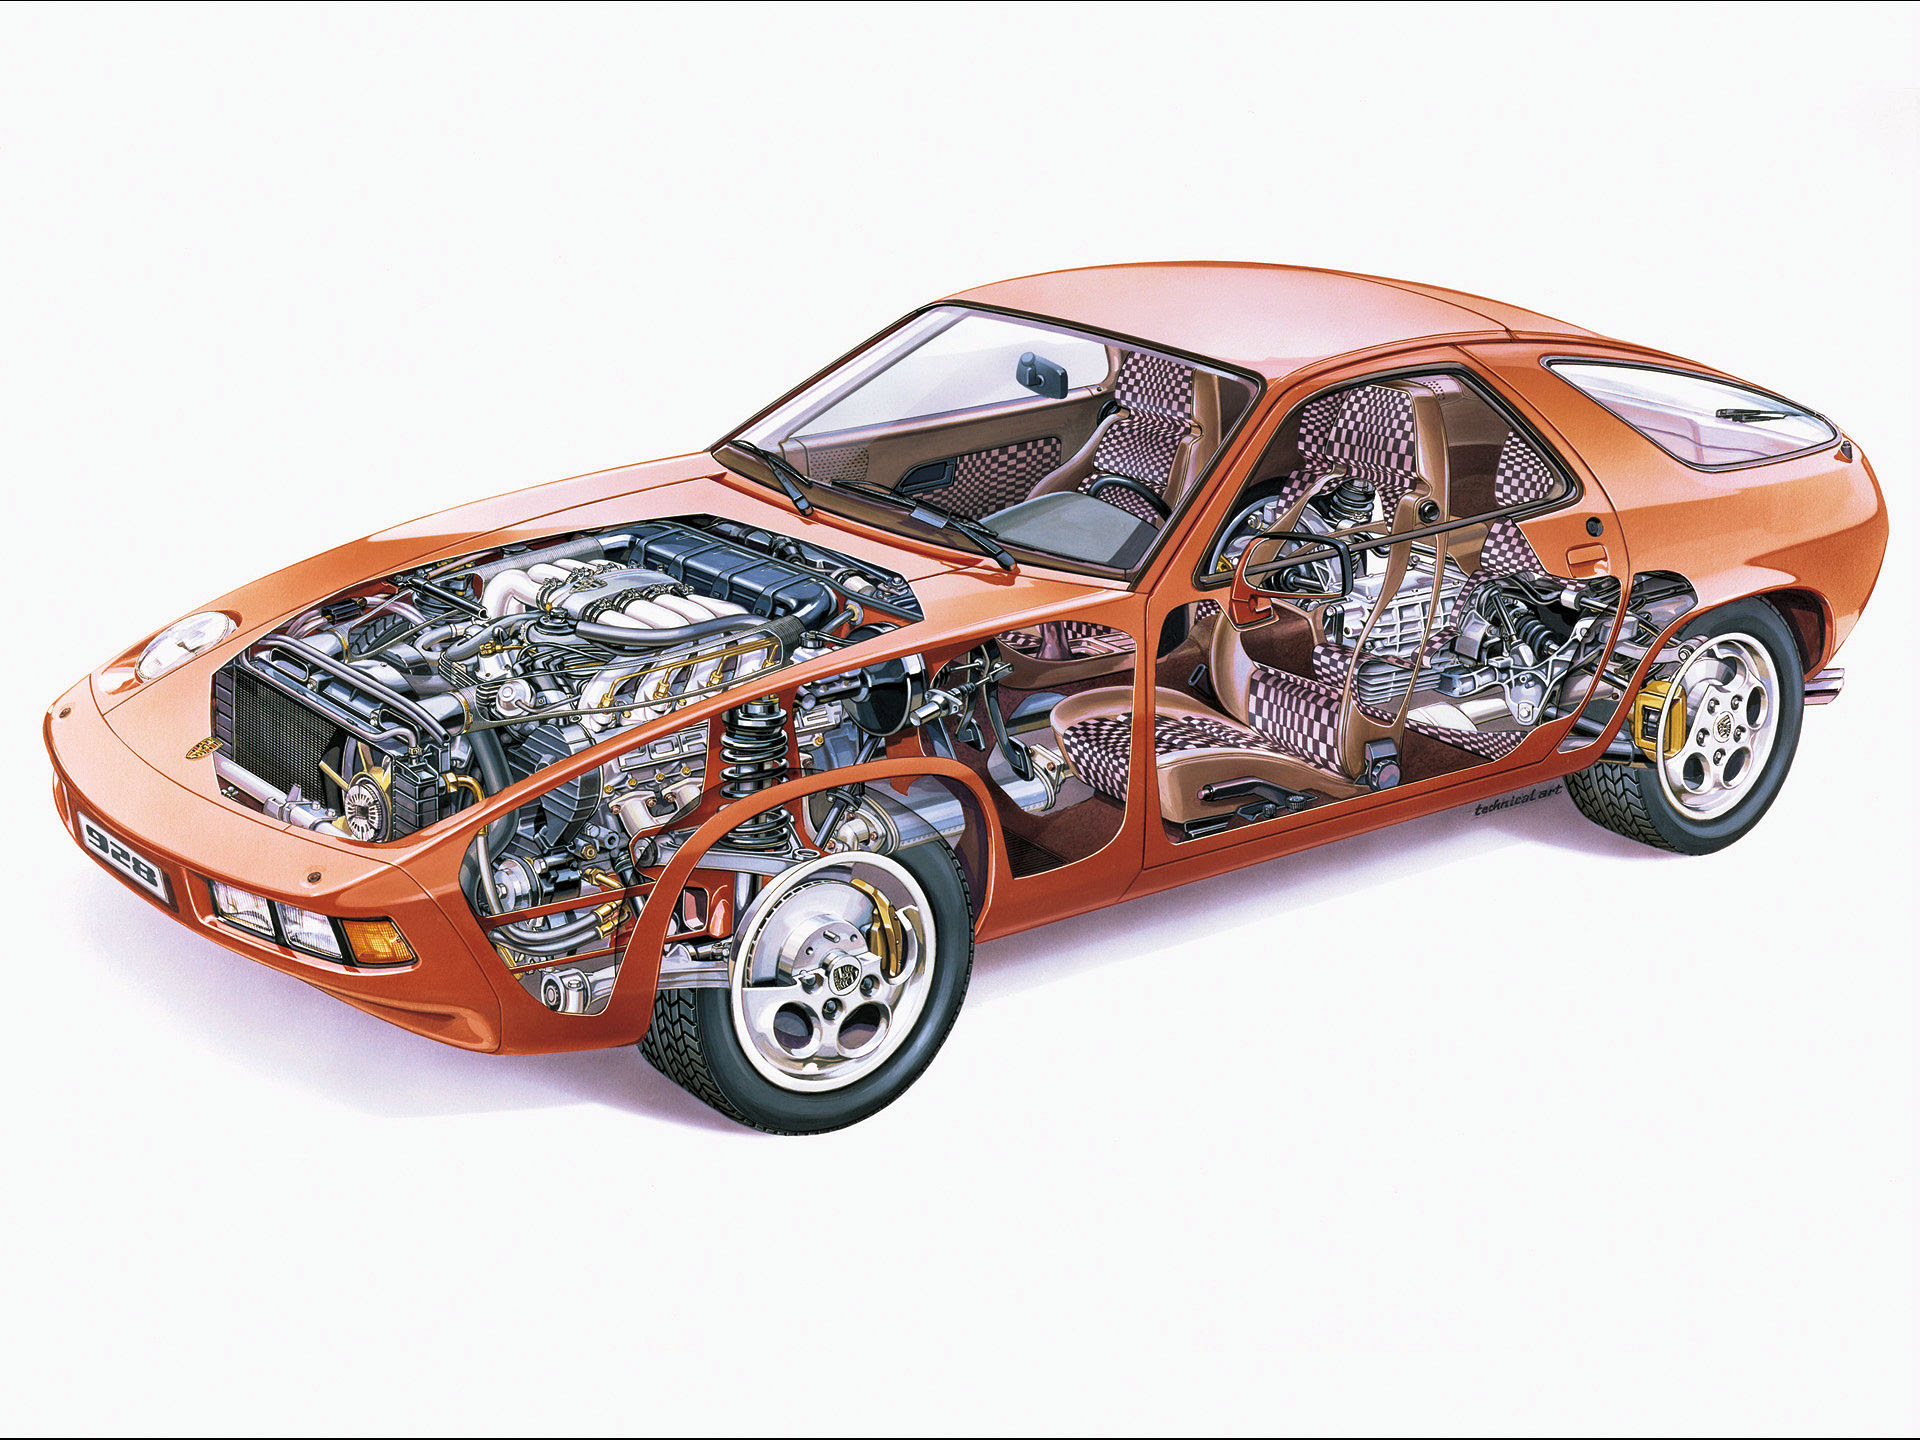 of the various 928 models: